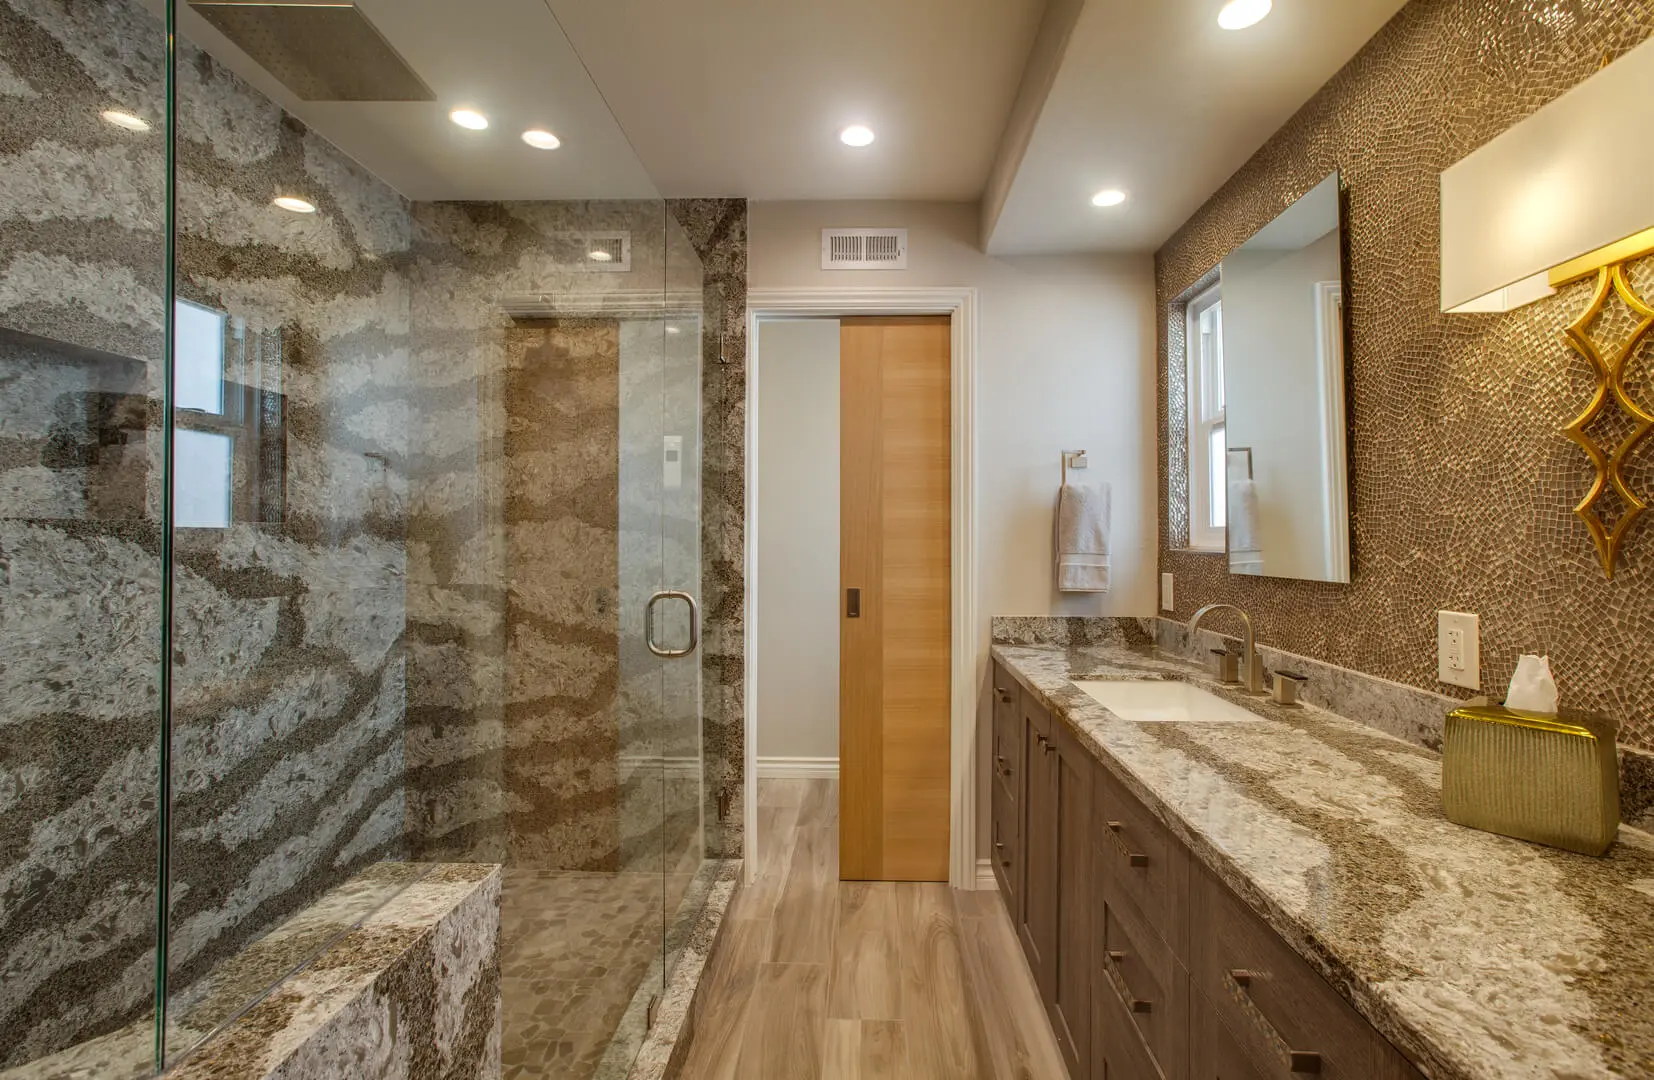 A bathroom with marble counter tops and wooden cabinets.